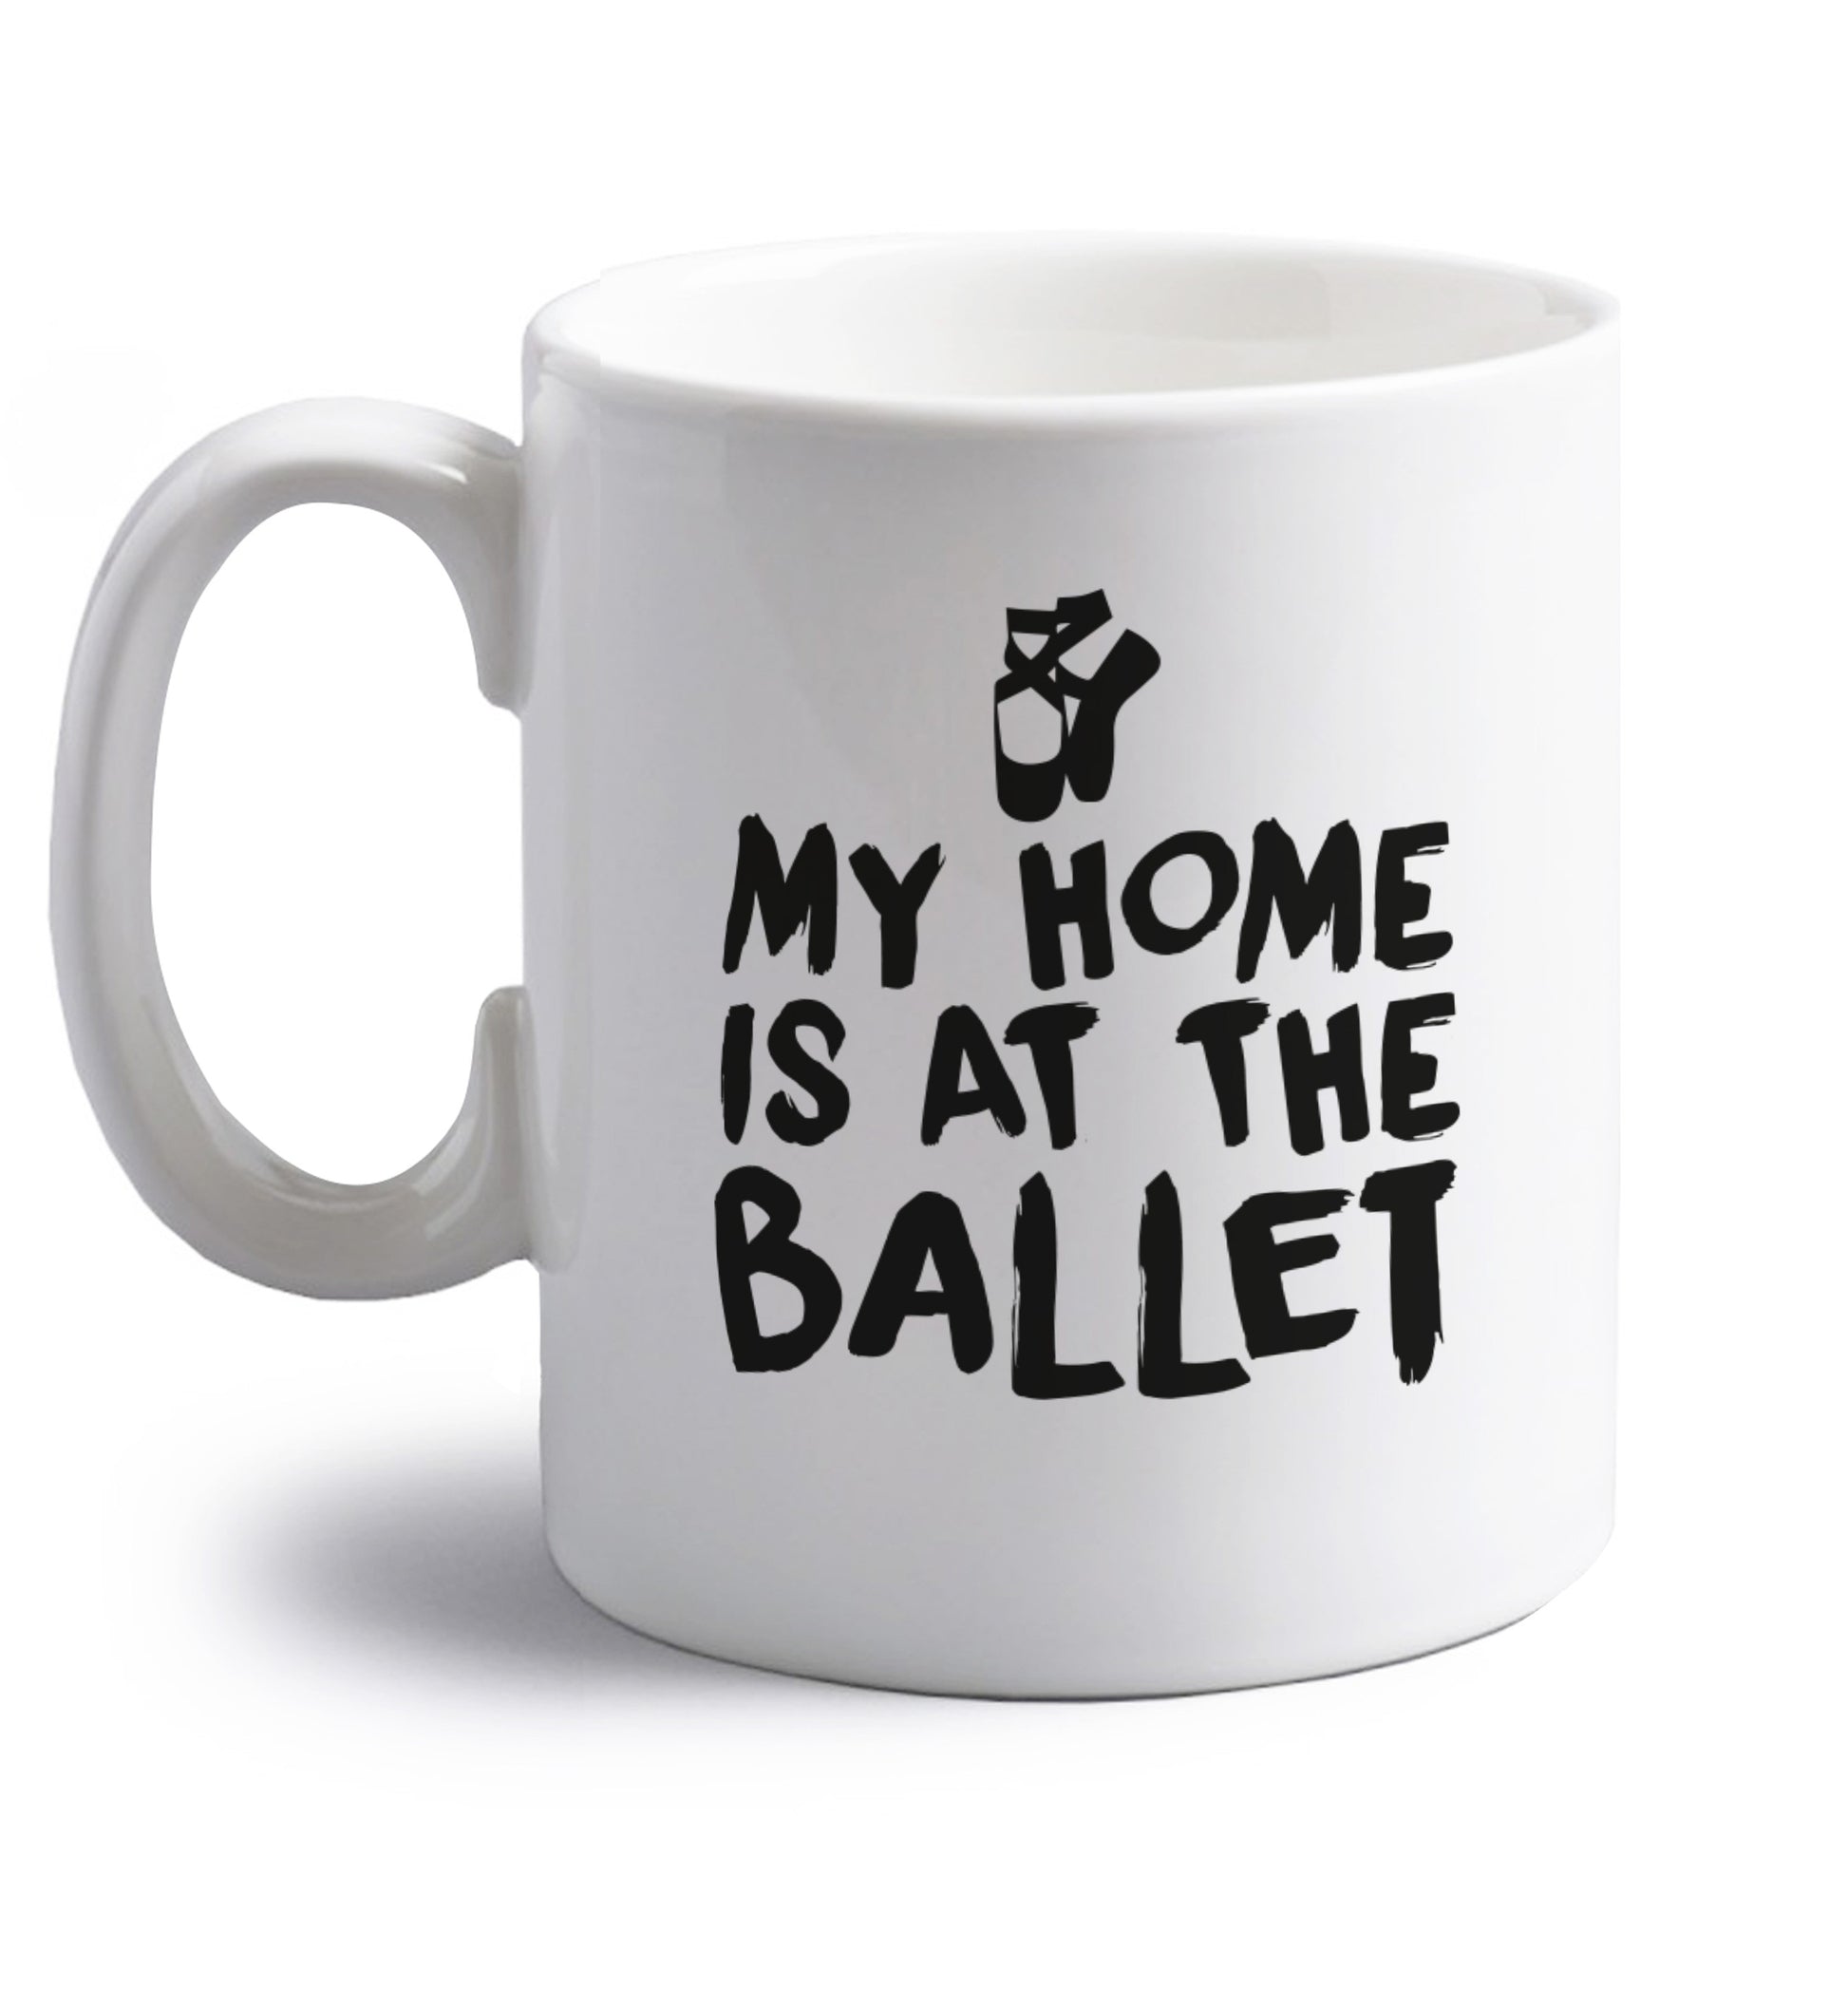 My home is at the ballet right handed white ceramic mug 